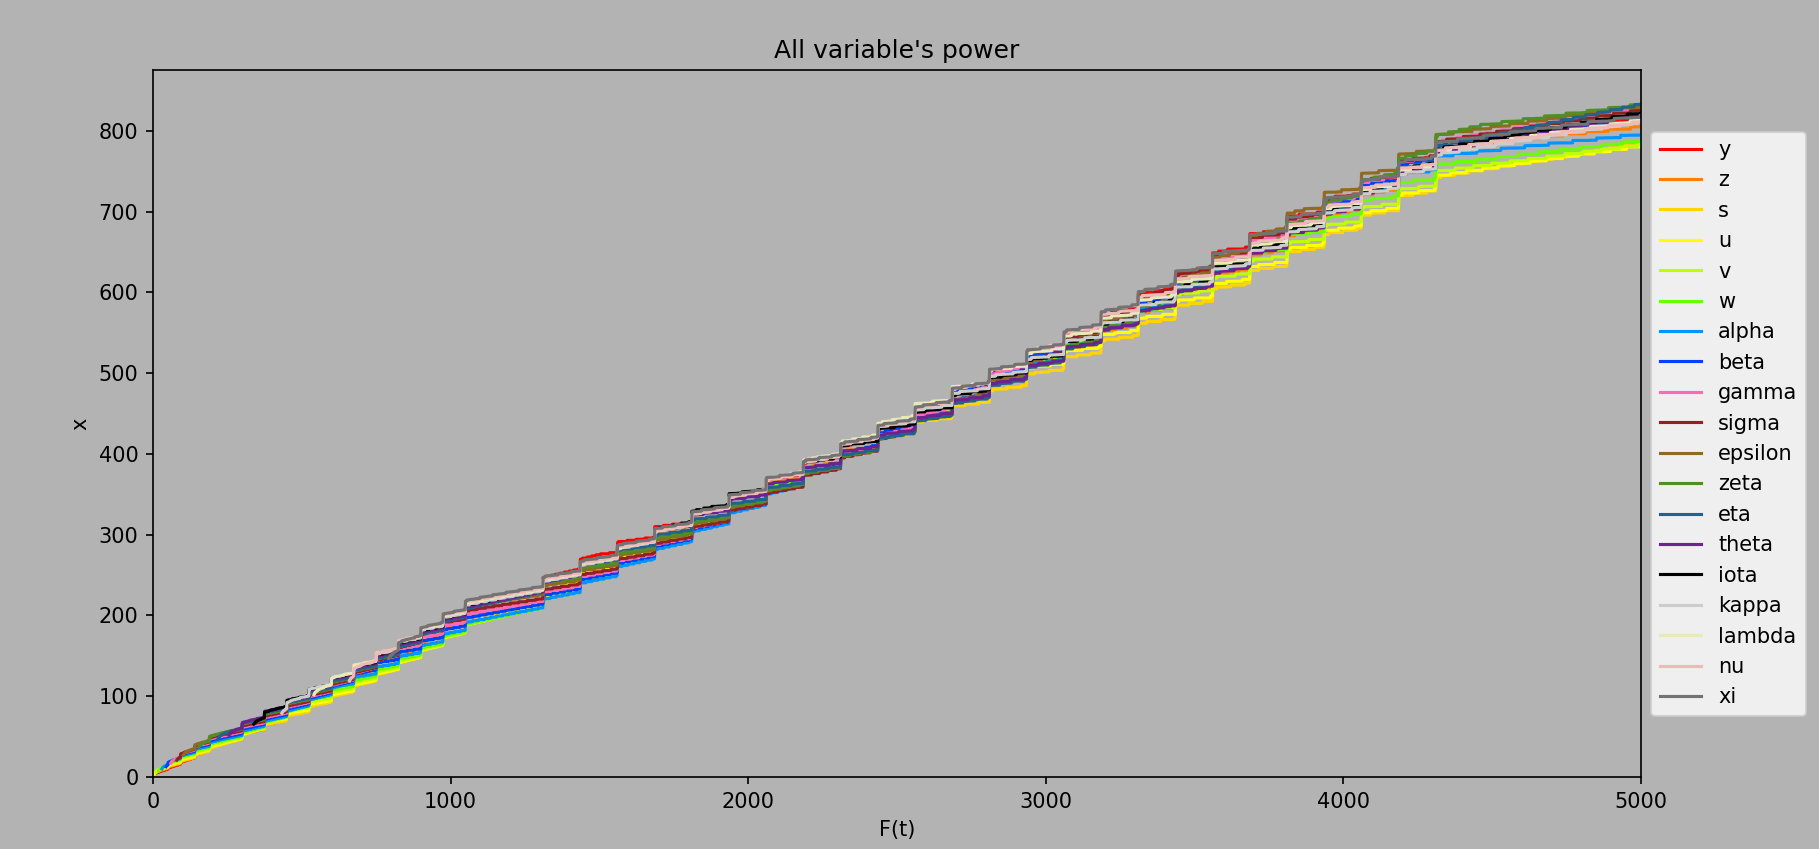 Variable power up to ee5000